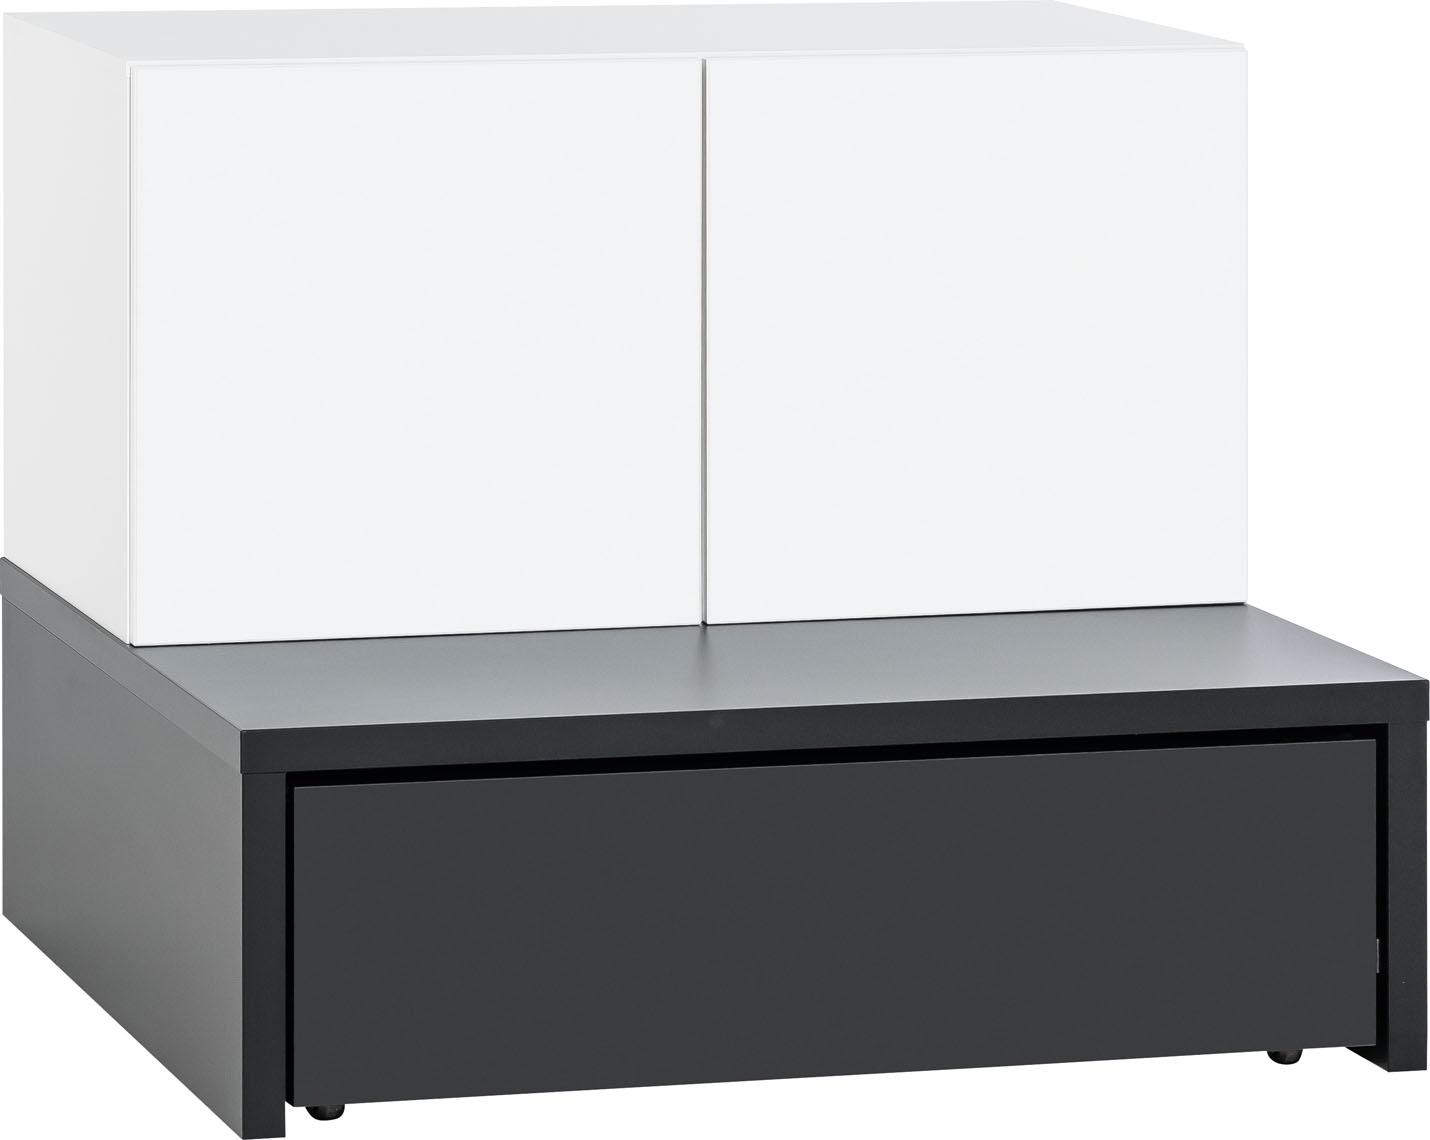 2-door cabinet with base 106x95 Young Users